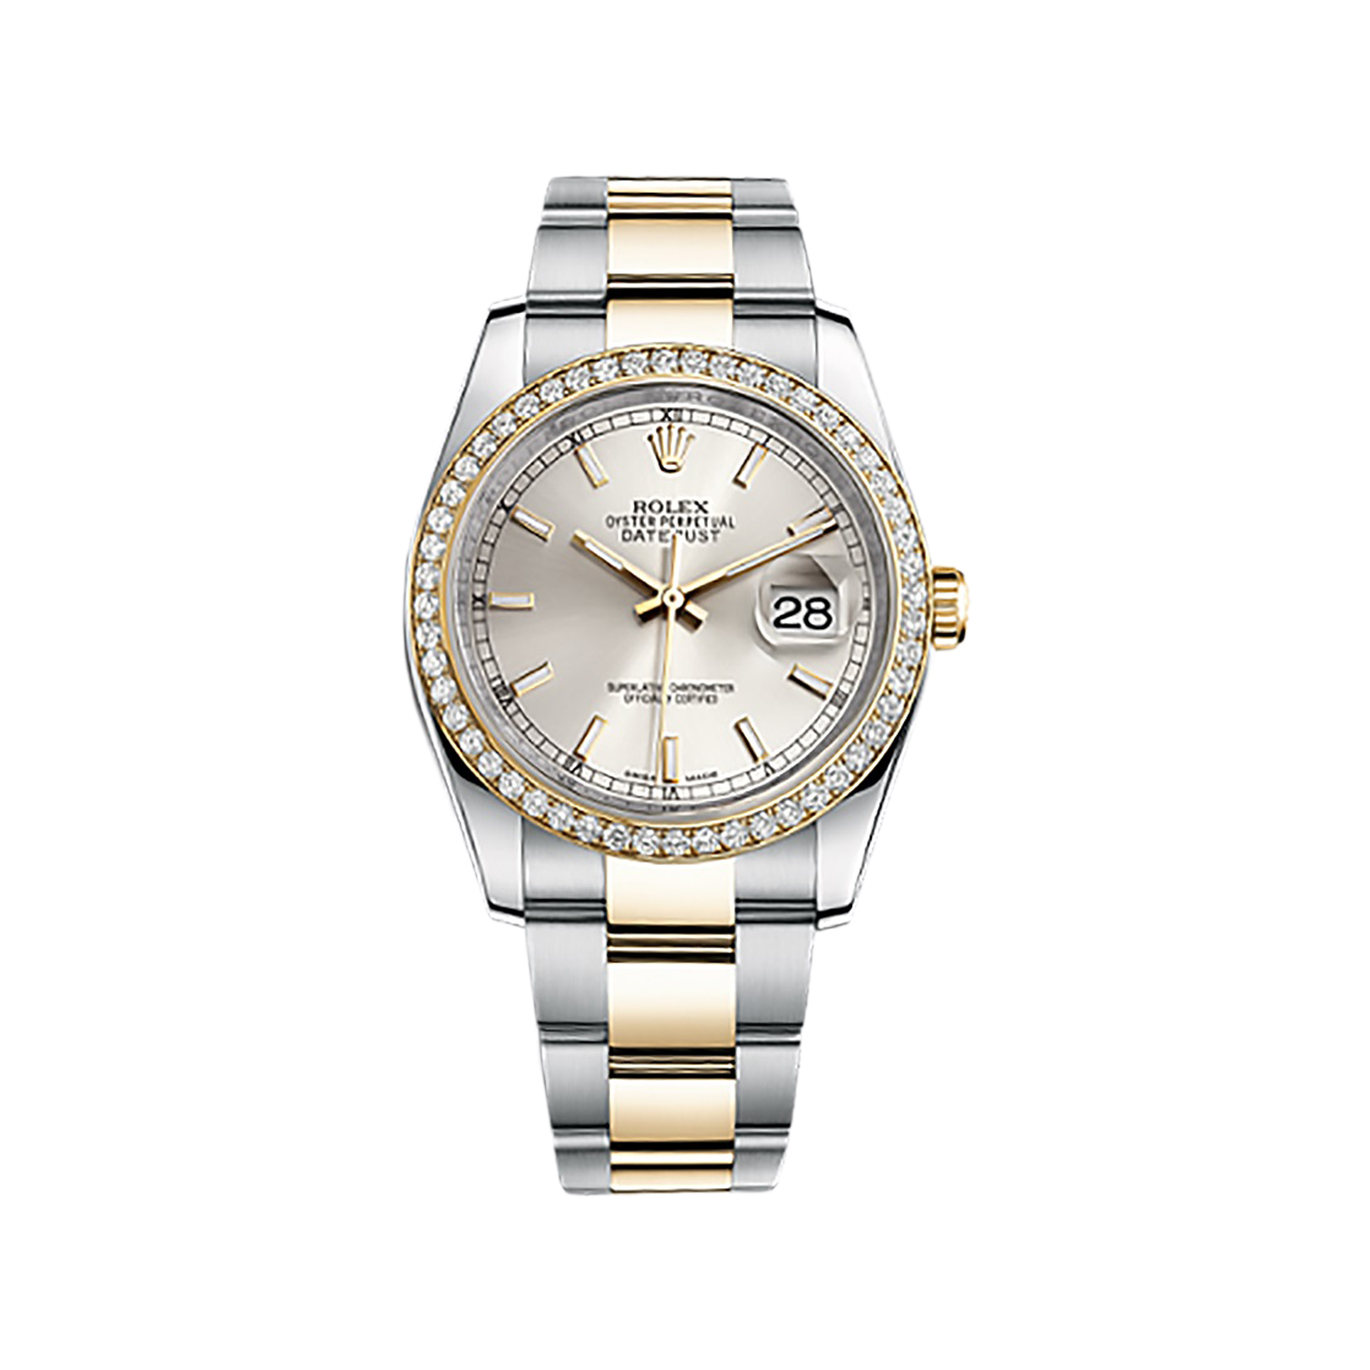 Datejust 36 116243 Gold & Stainless Steel Watch (Silver) - Click Image to Close